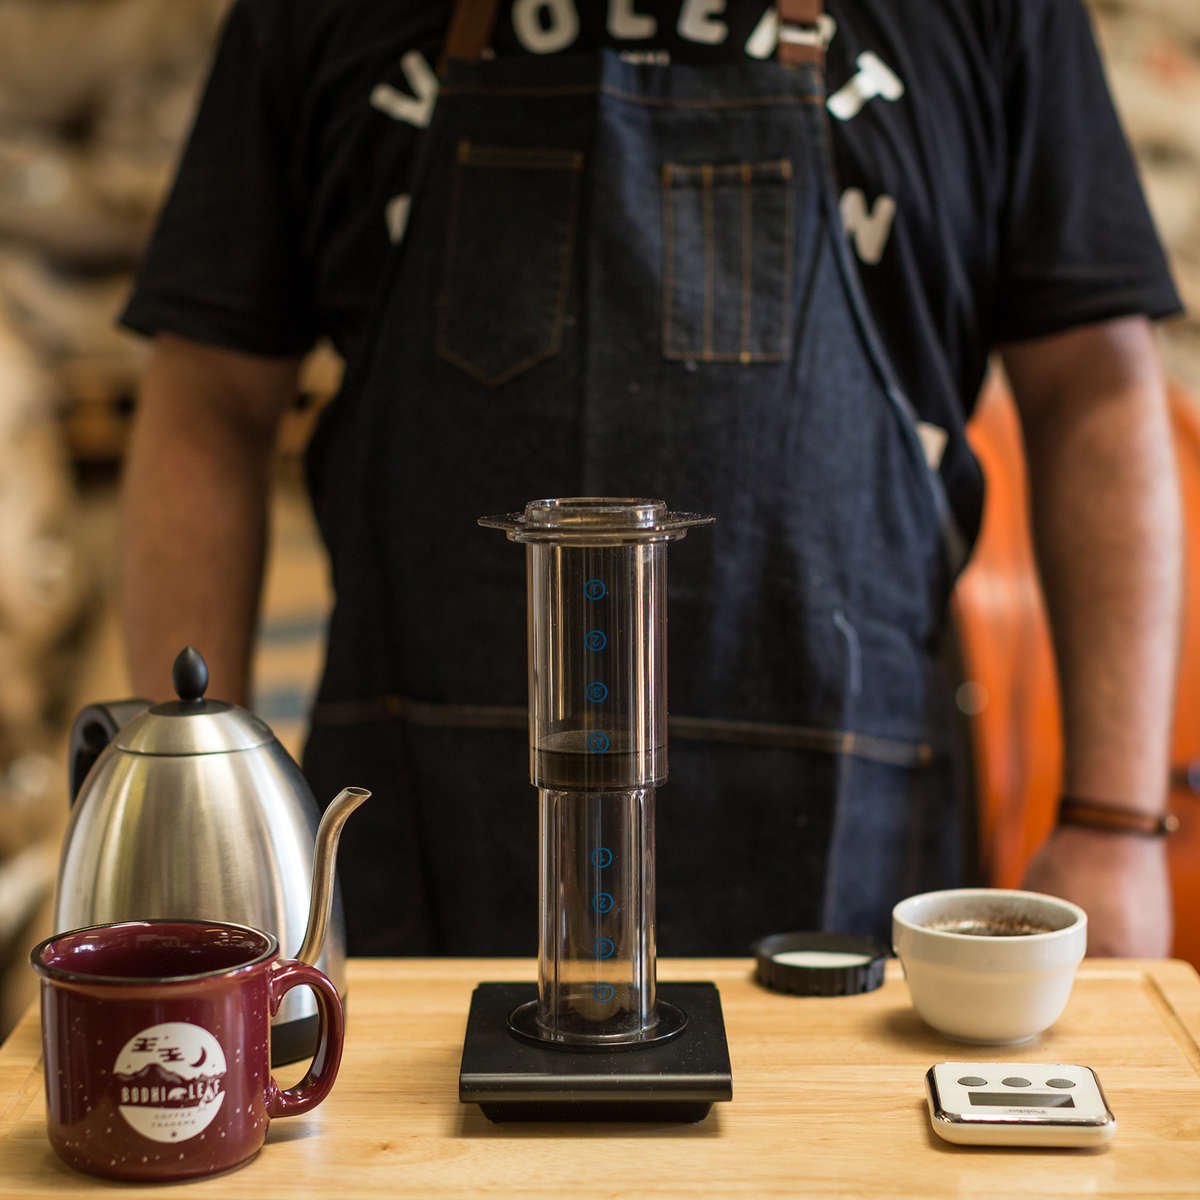 Barista with Aeropress on scale, with mug and kettle.